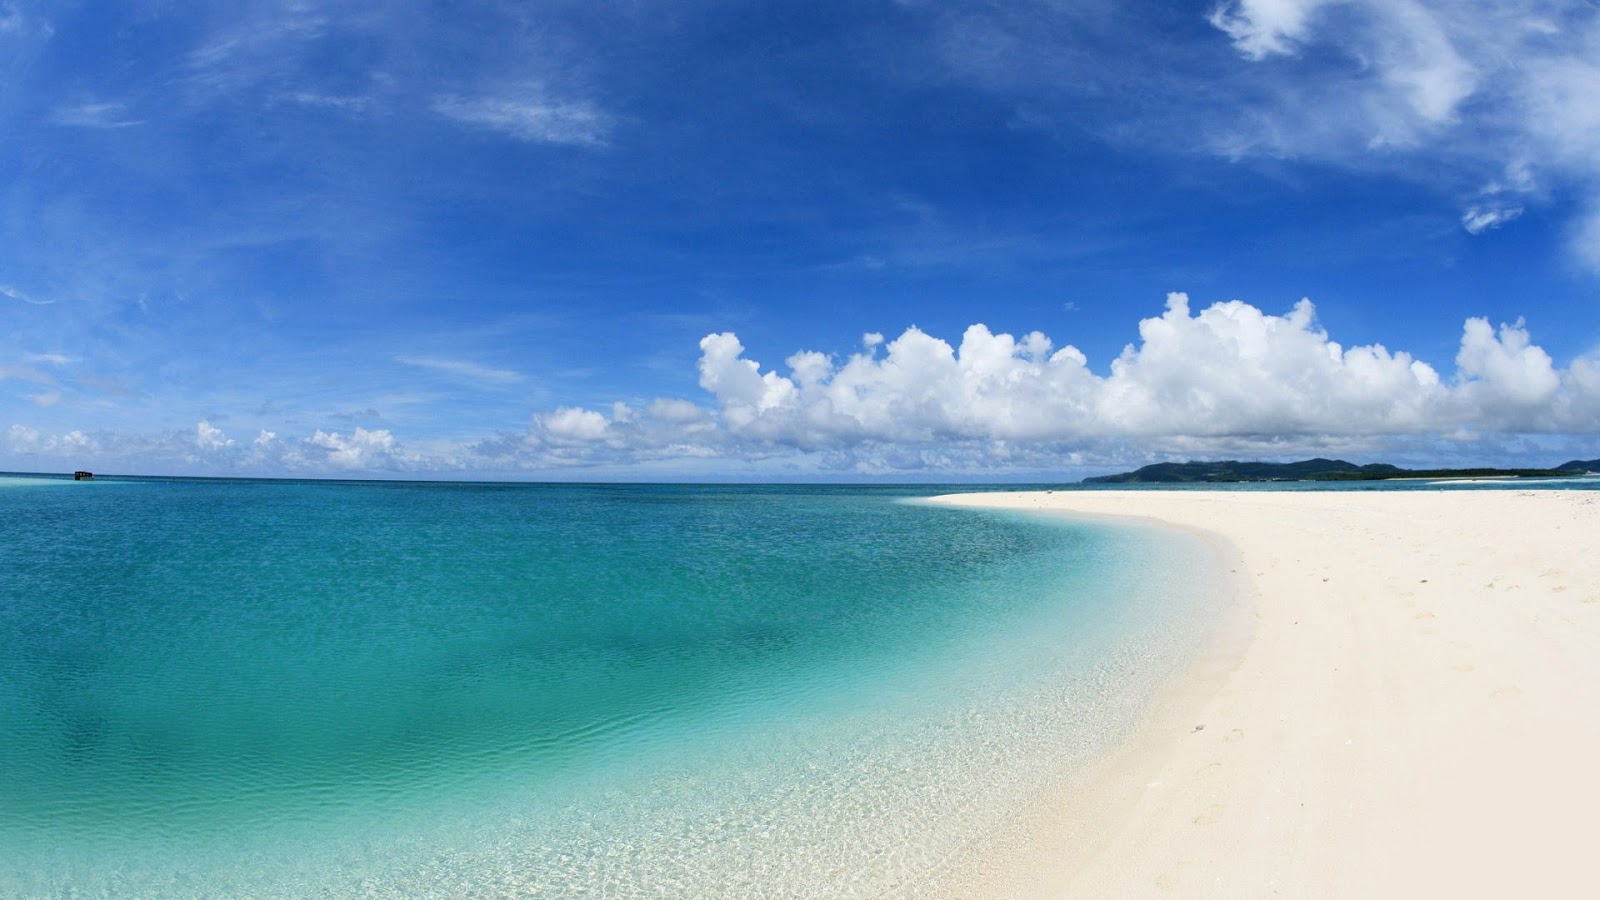 Blue Water White Sand Beach Hd Wallpapers 1080p - Long White Sand Beach - HD Wallpaper 